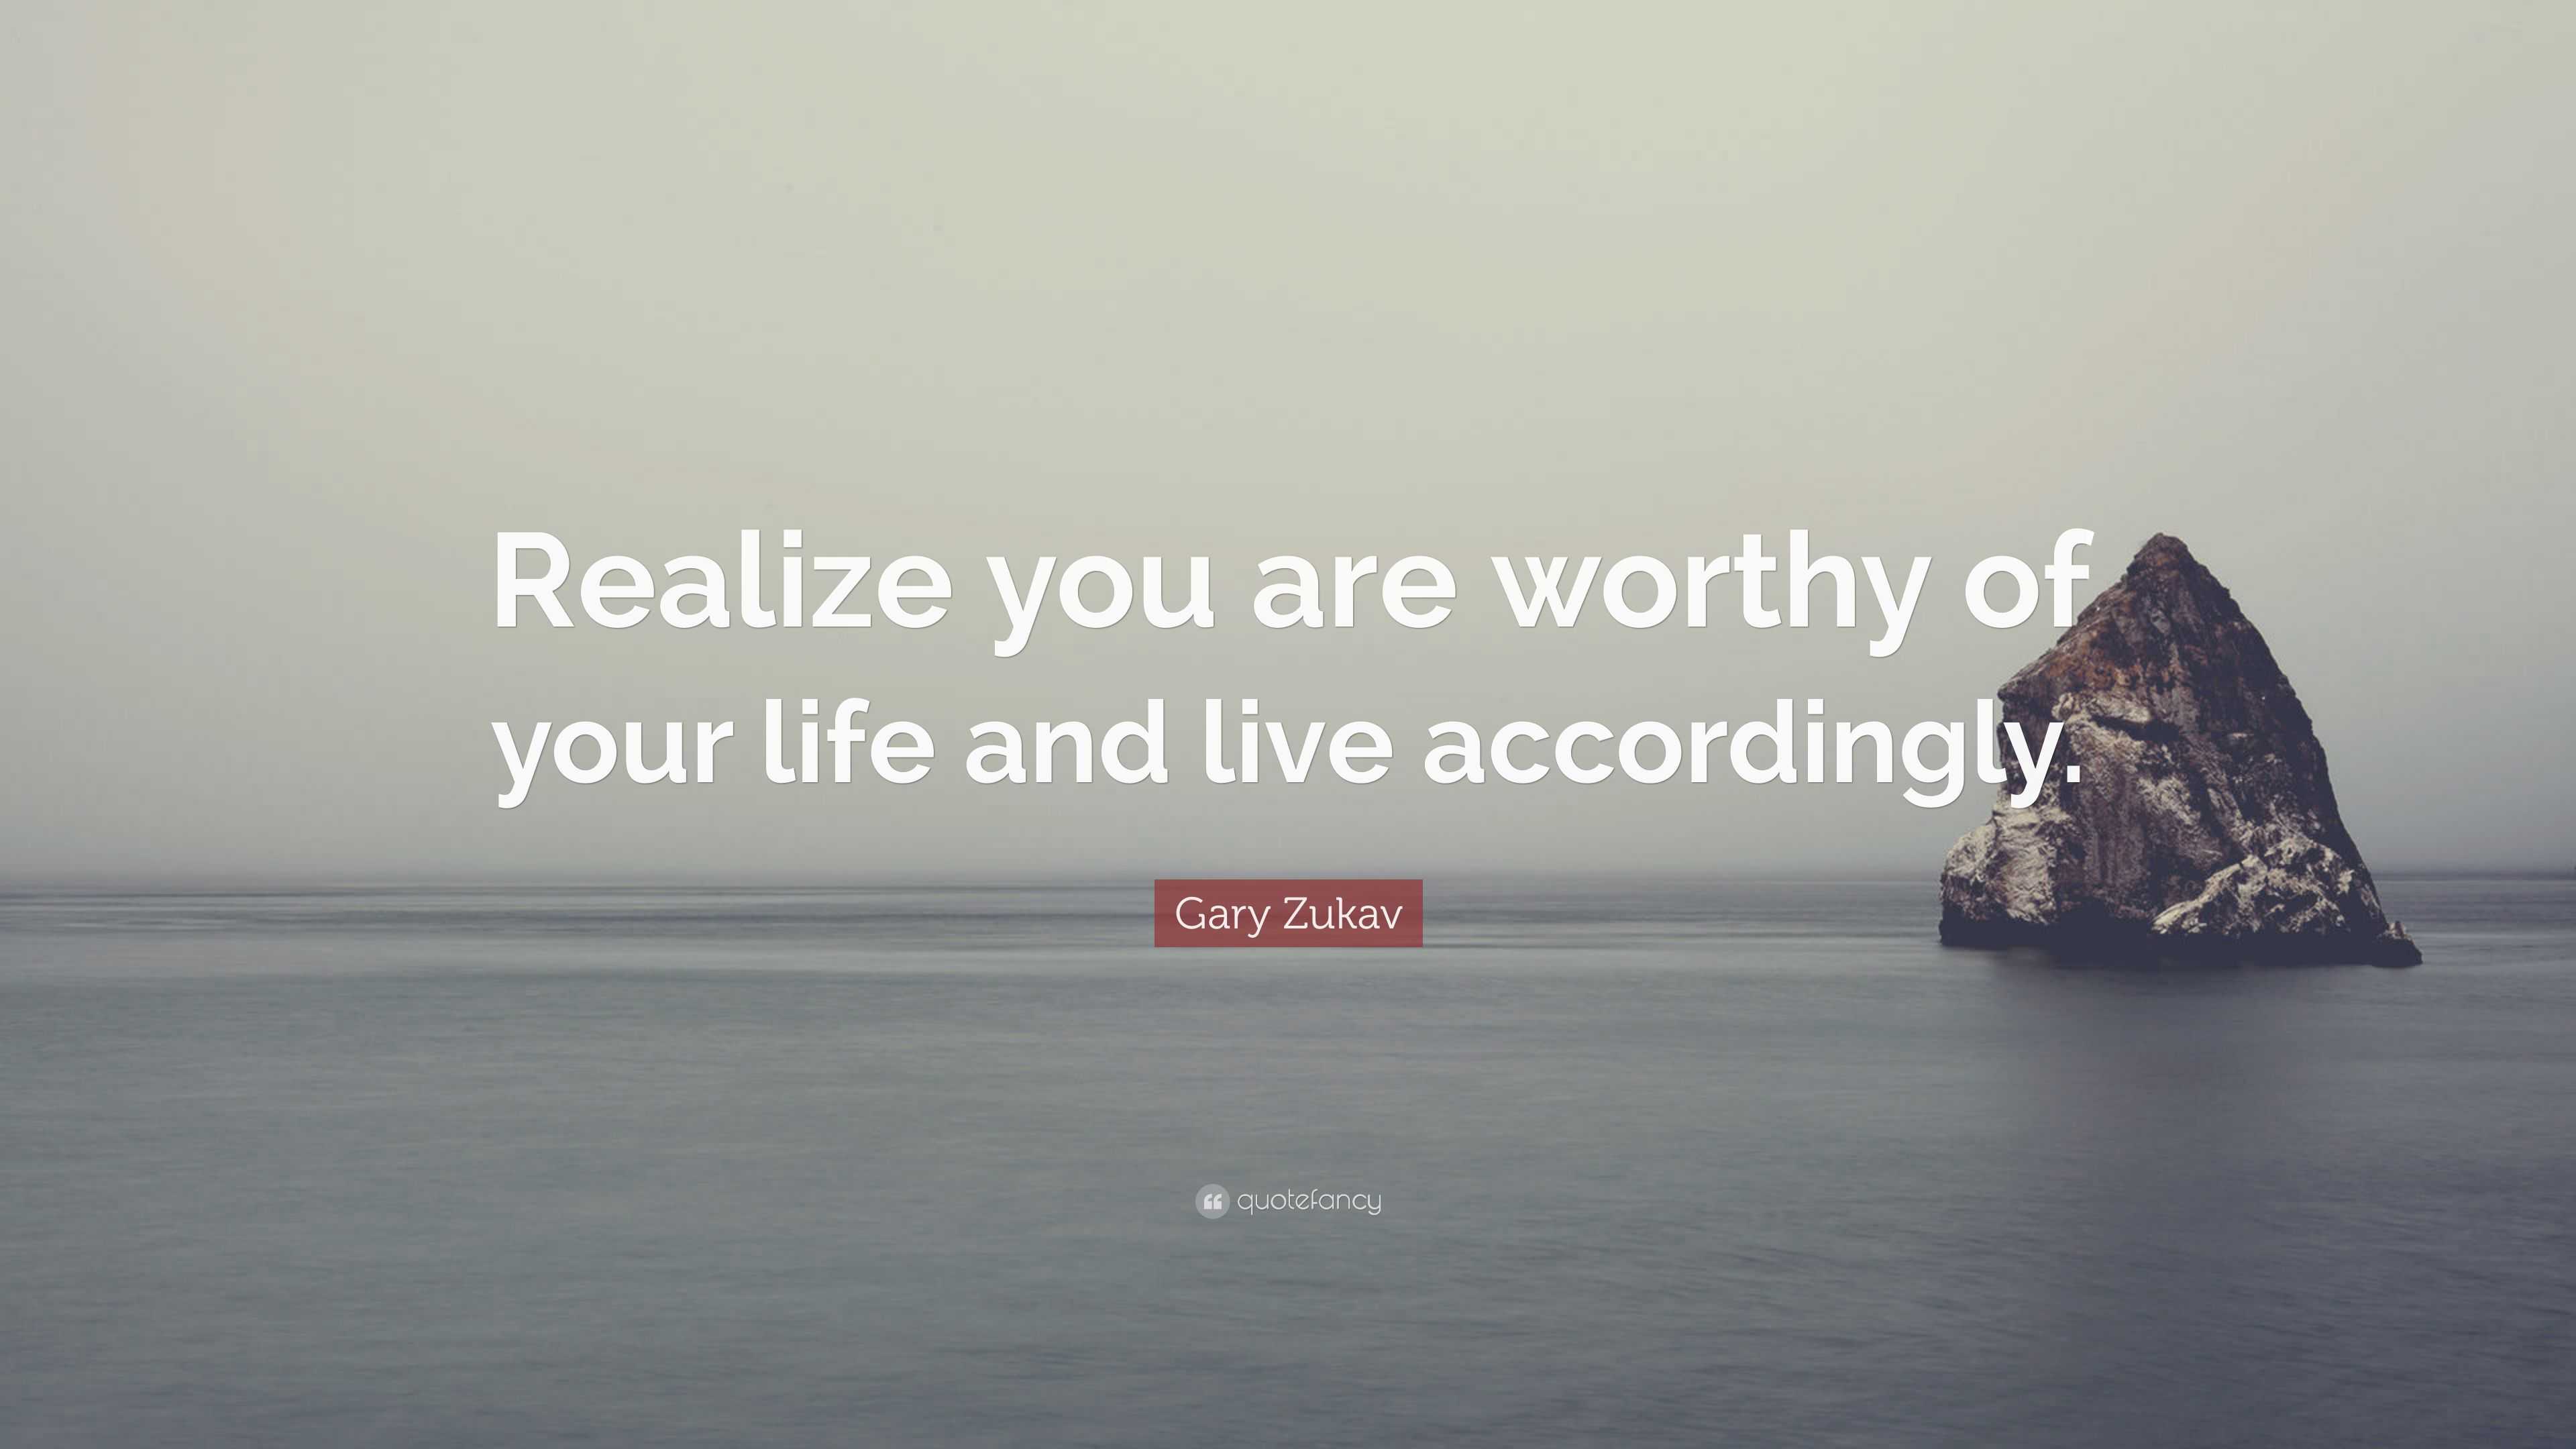 Gary Zukav Quote: “Realize you are worthy of your life and live ...